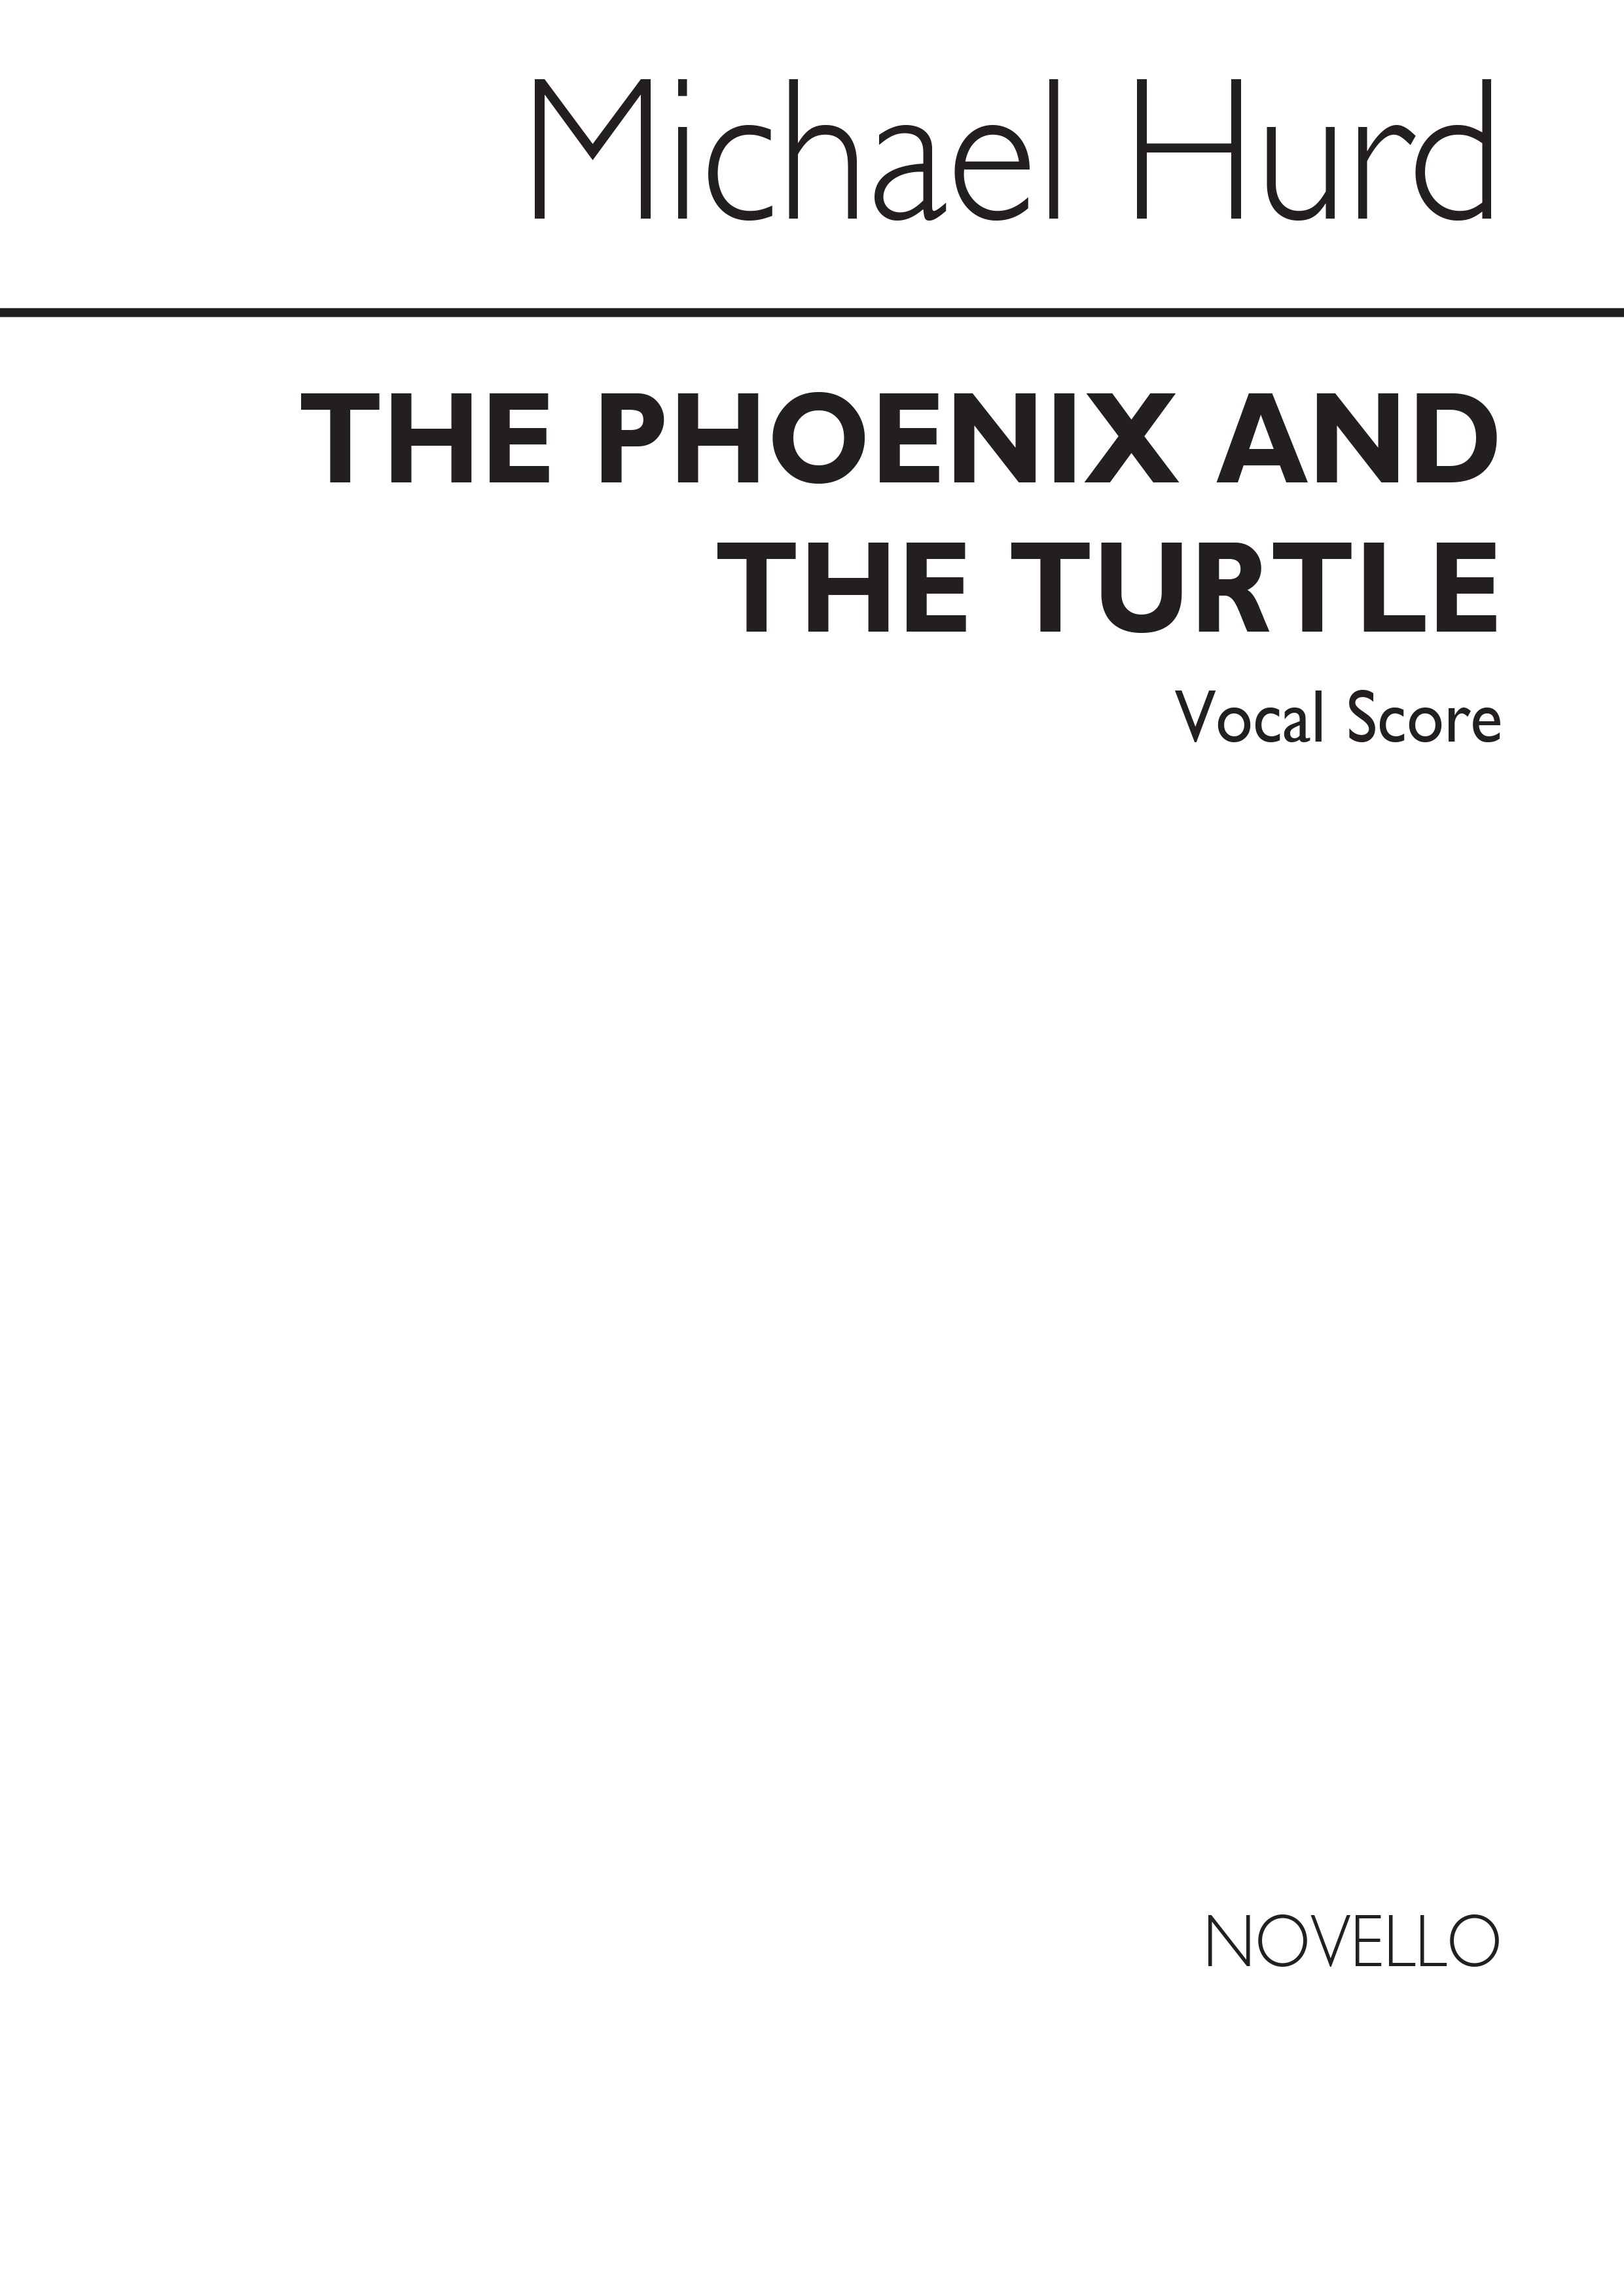 Hurd: Phoenix And The Turtle (Vocal Score)